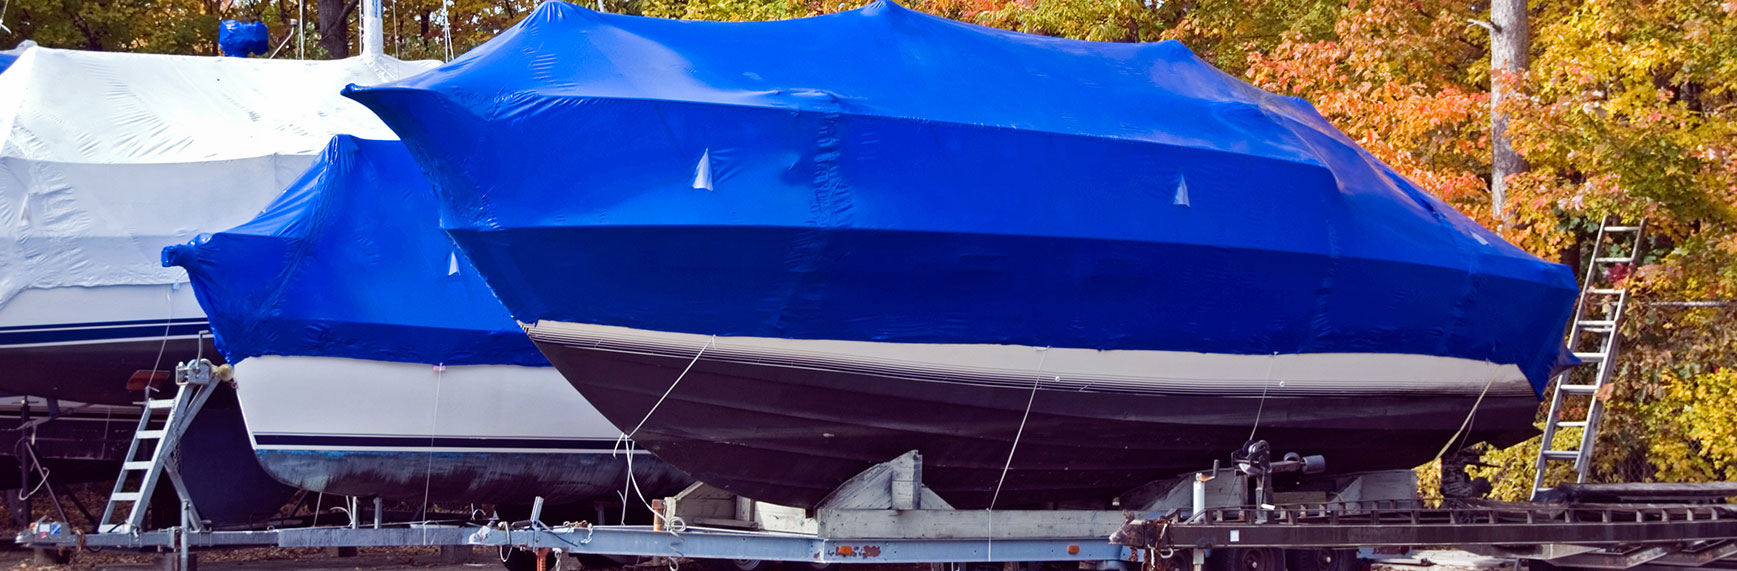 Shrink-Wrapping Boats